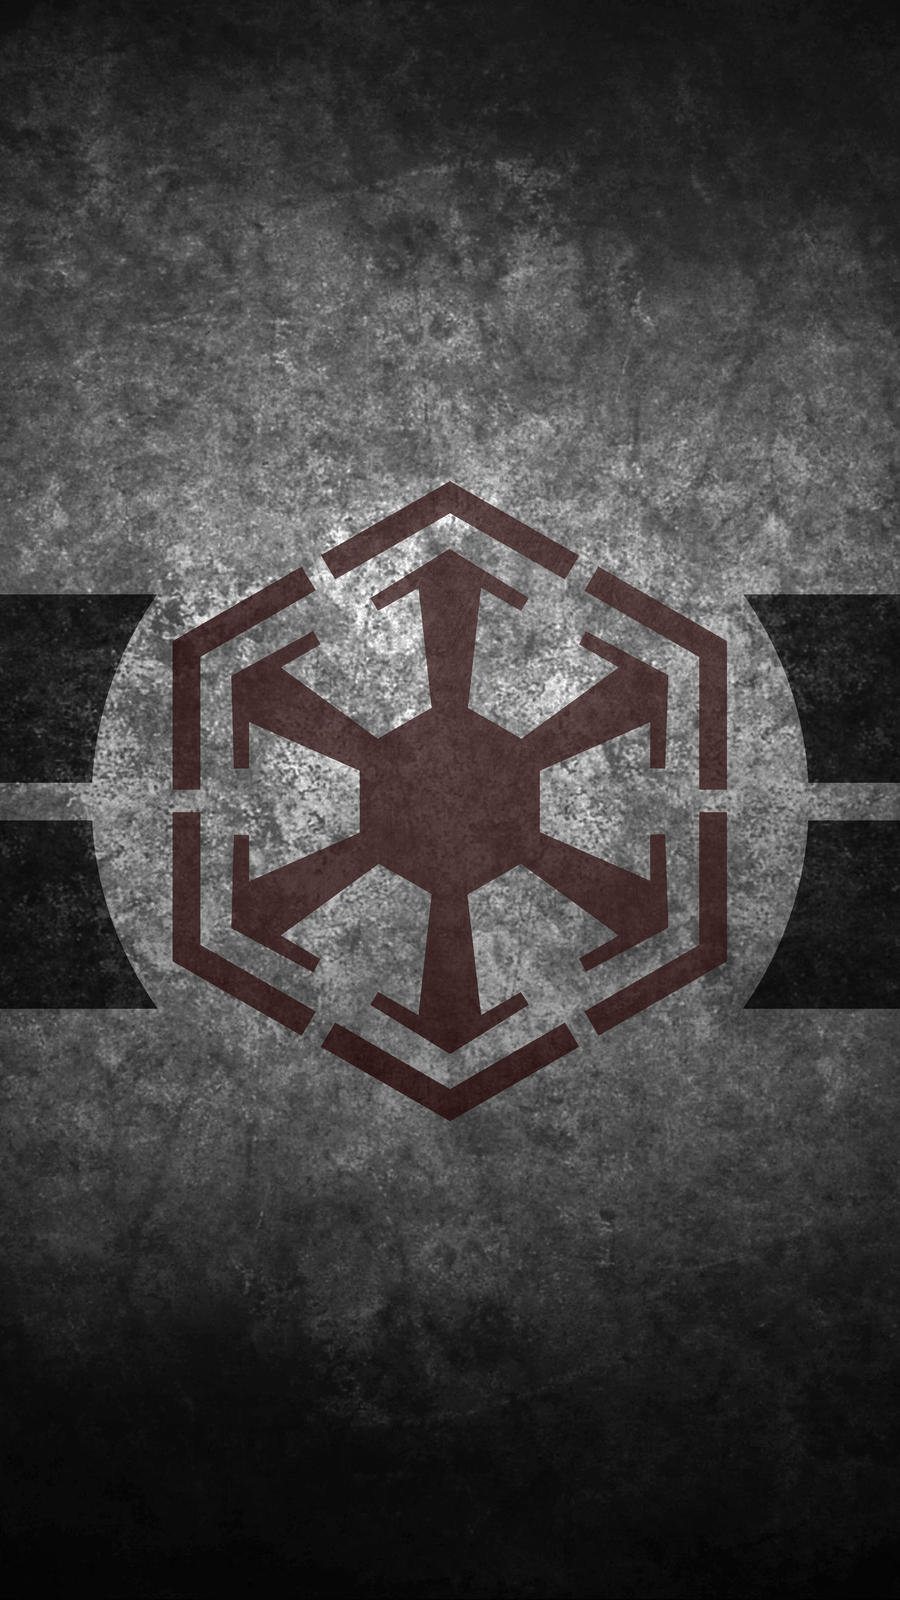 Star Wars Sith Empire Symbol Cellphone Wallpaper by swmand4 on 900x1600